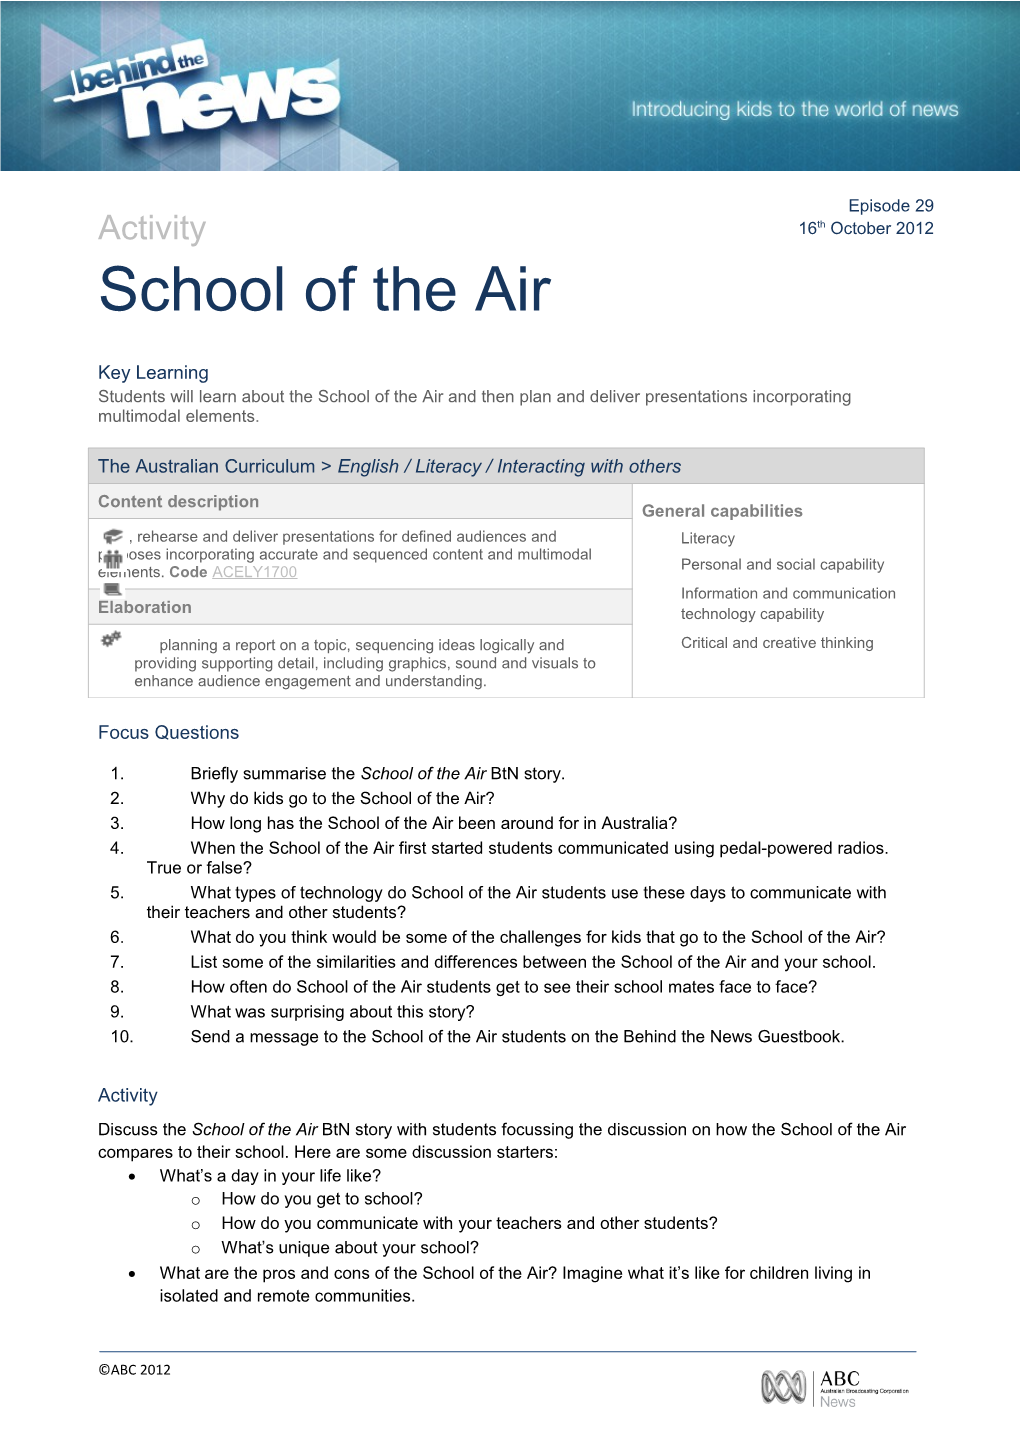 School of the Air